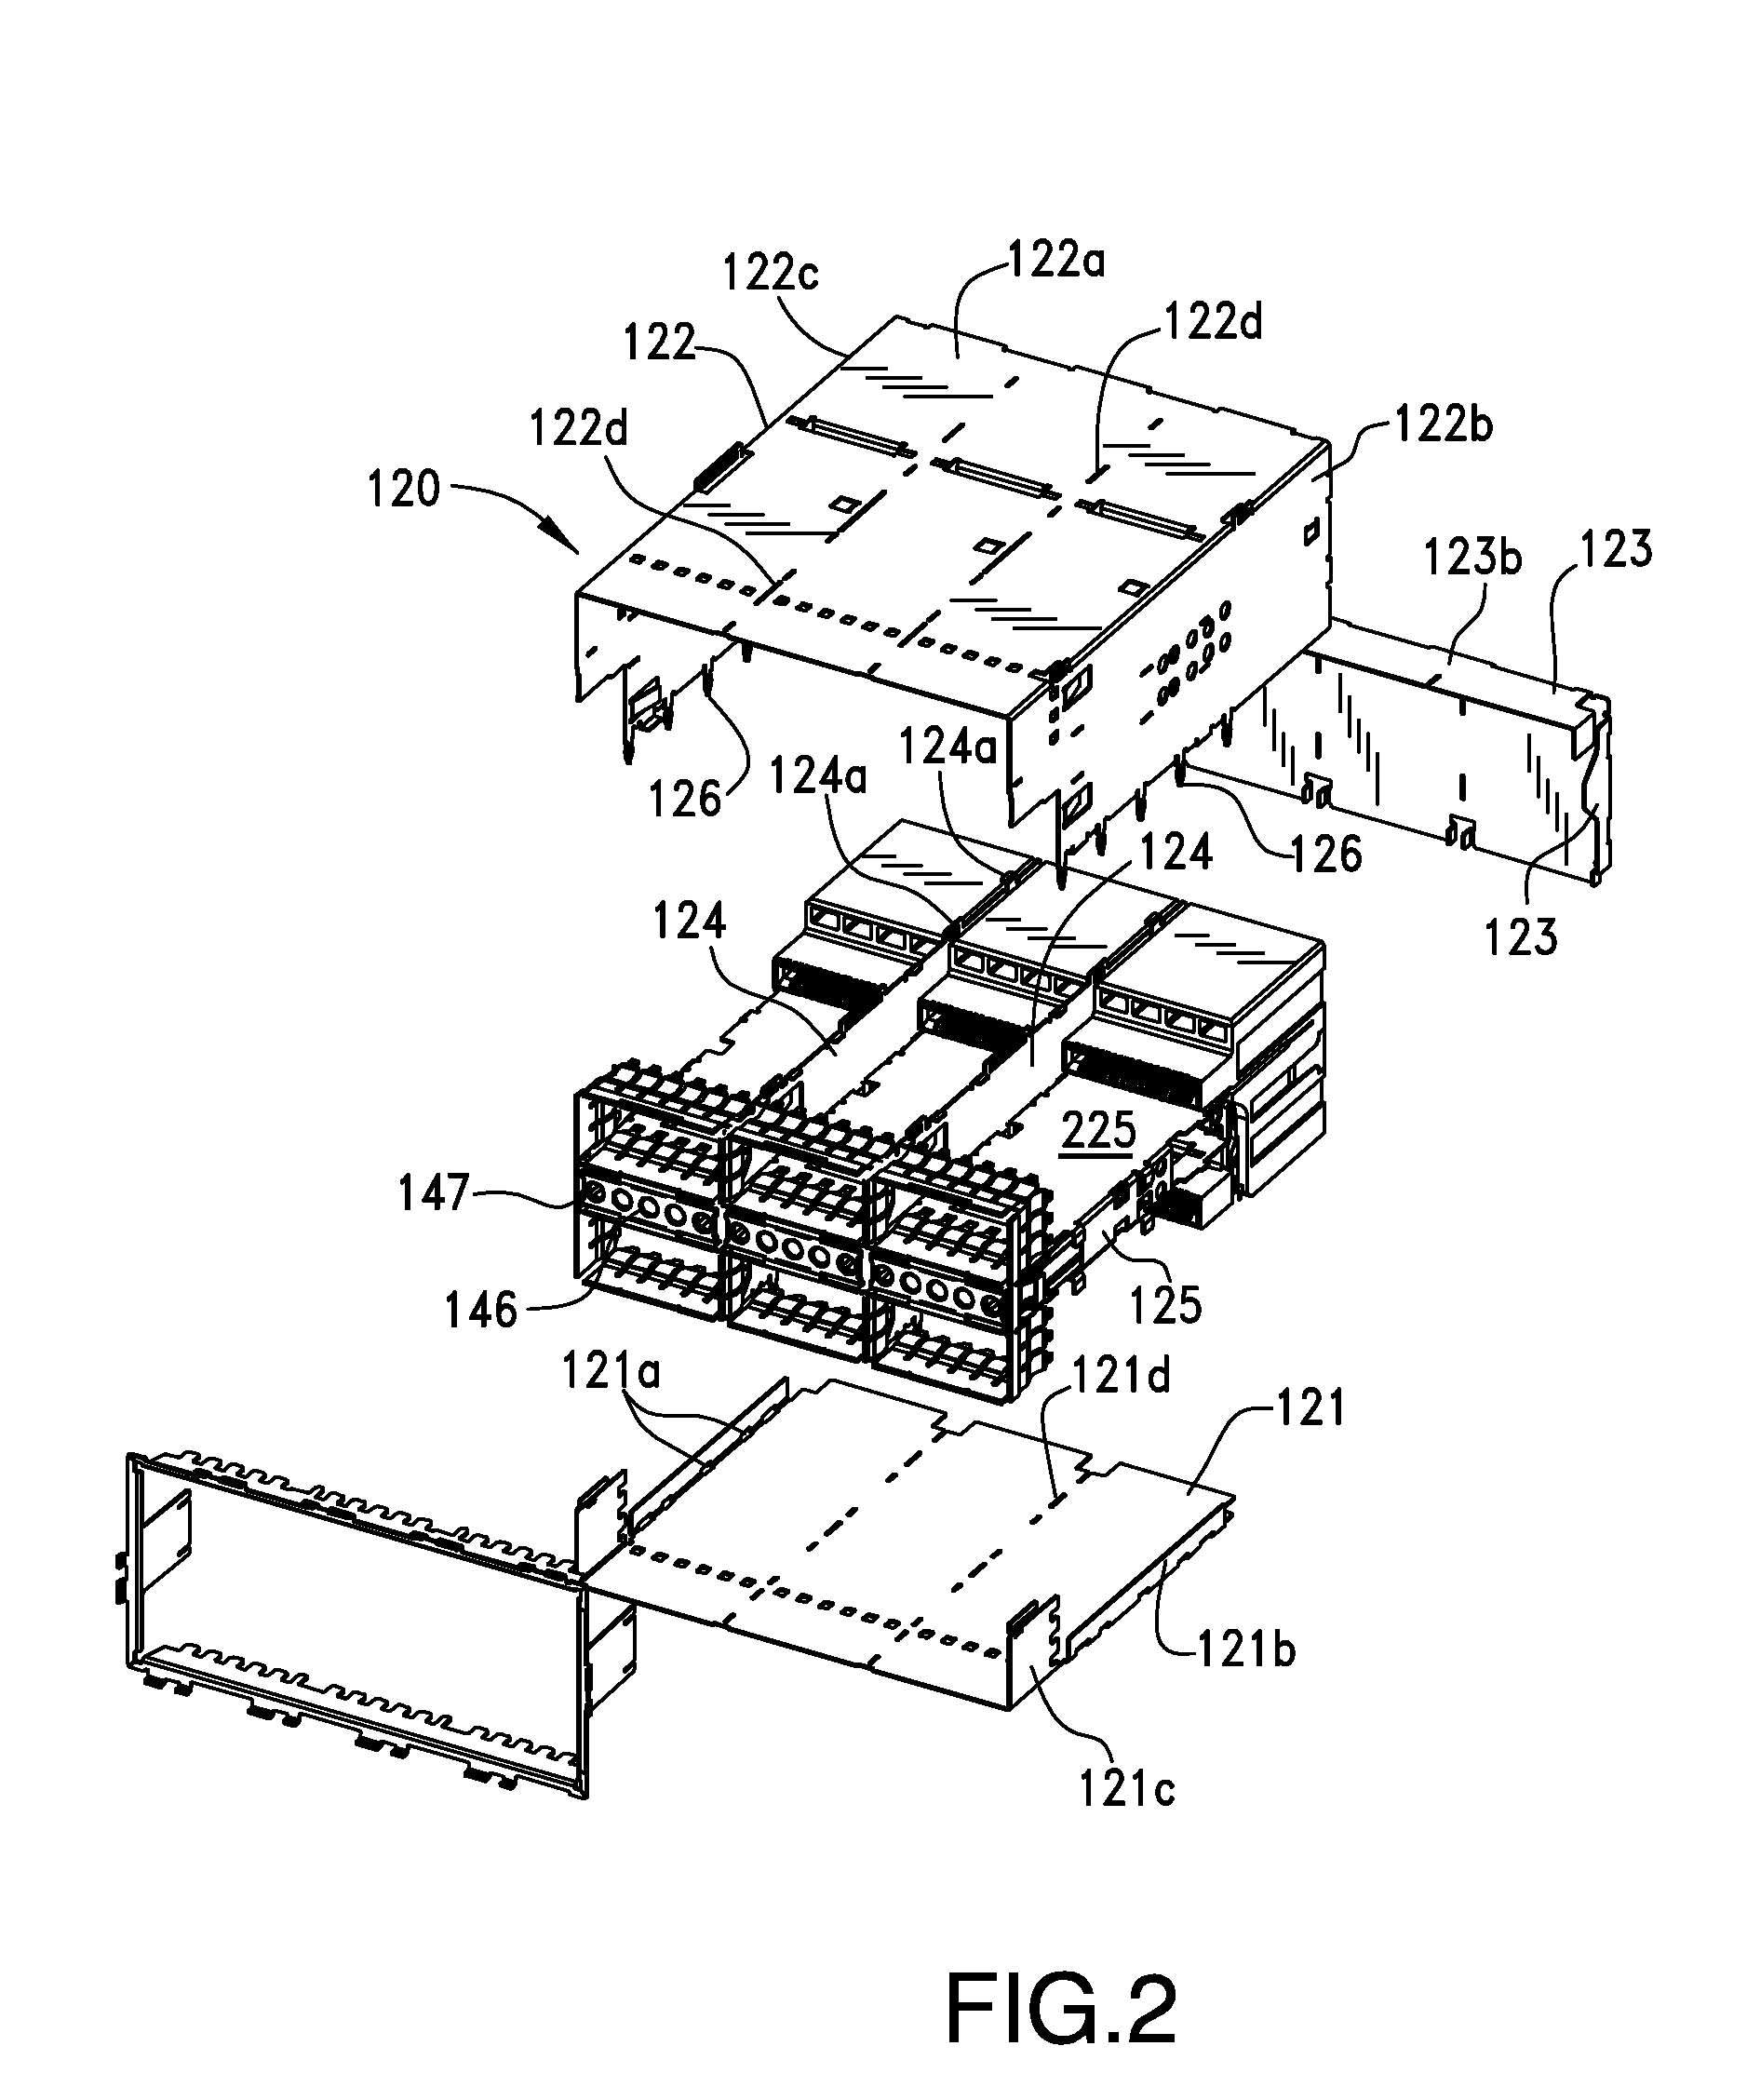 Connector assembly with improved cooling capability